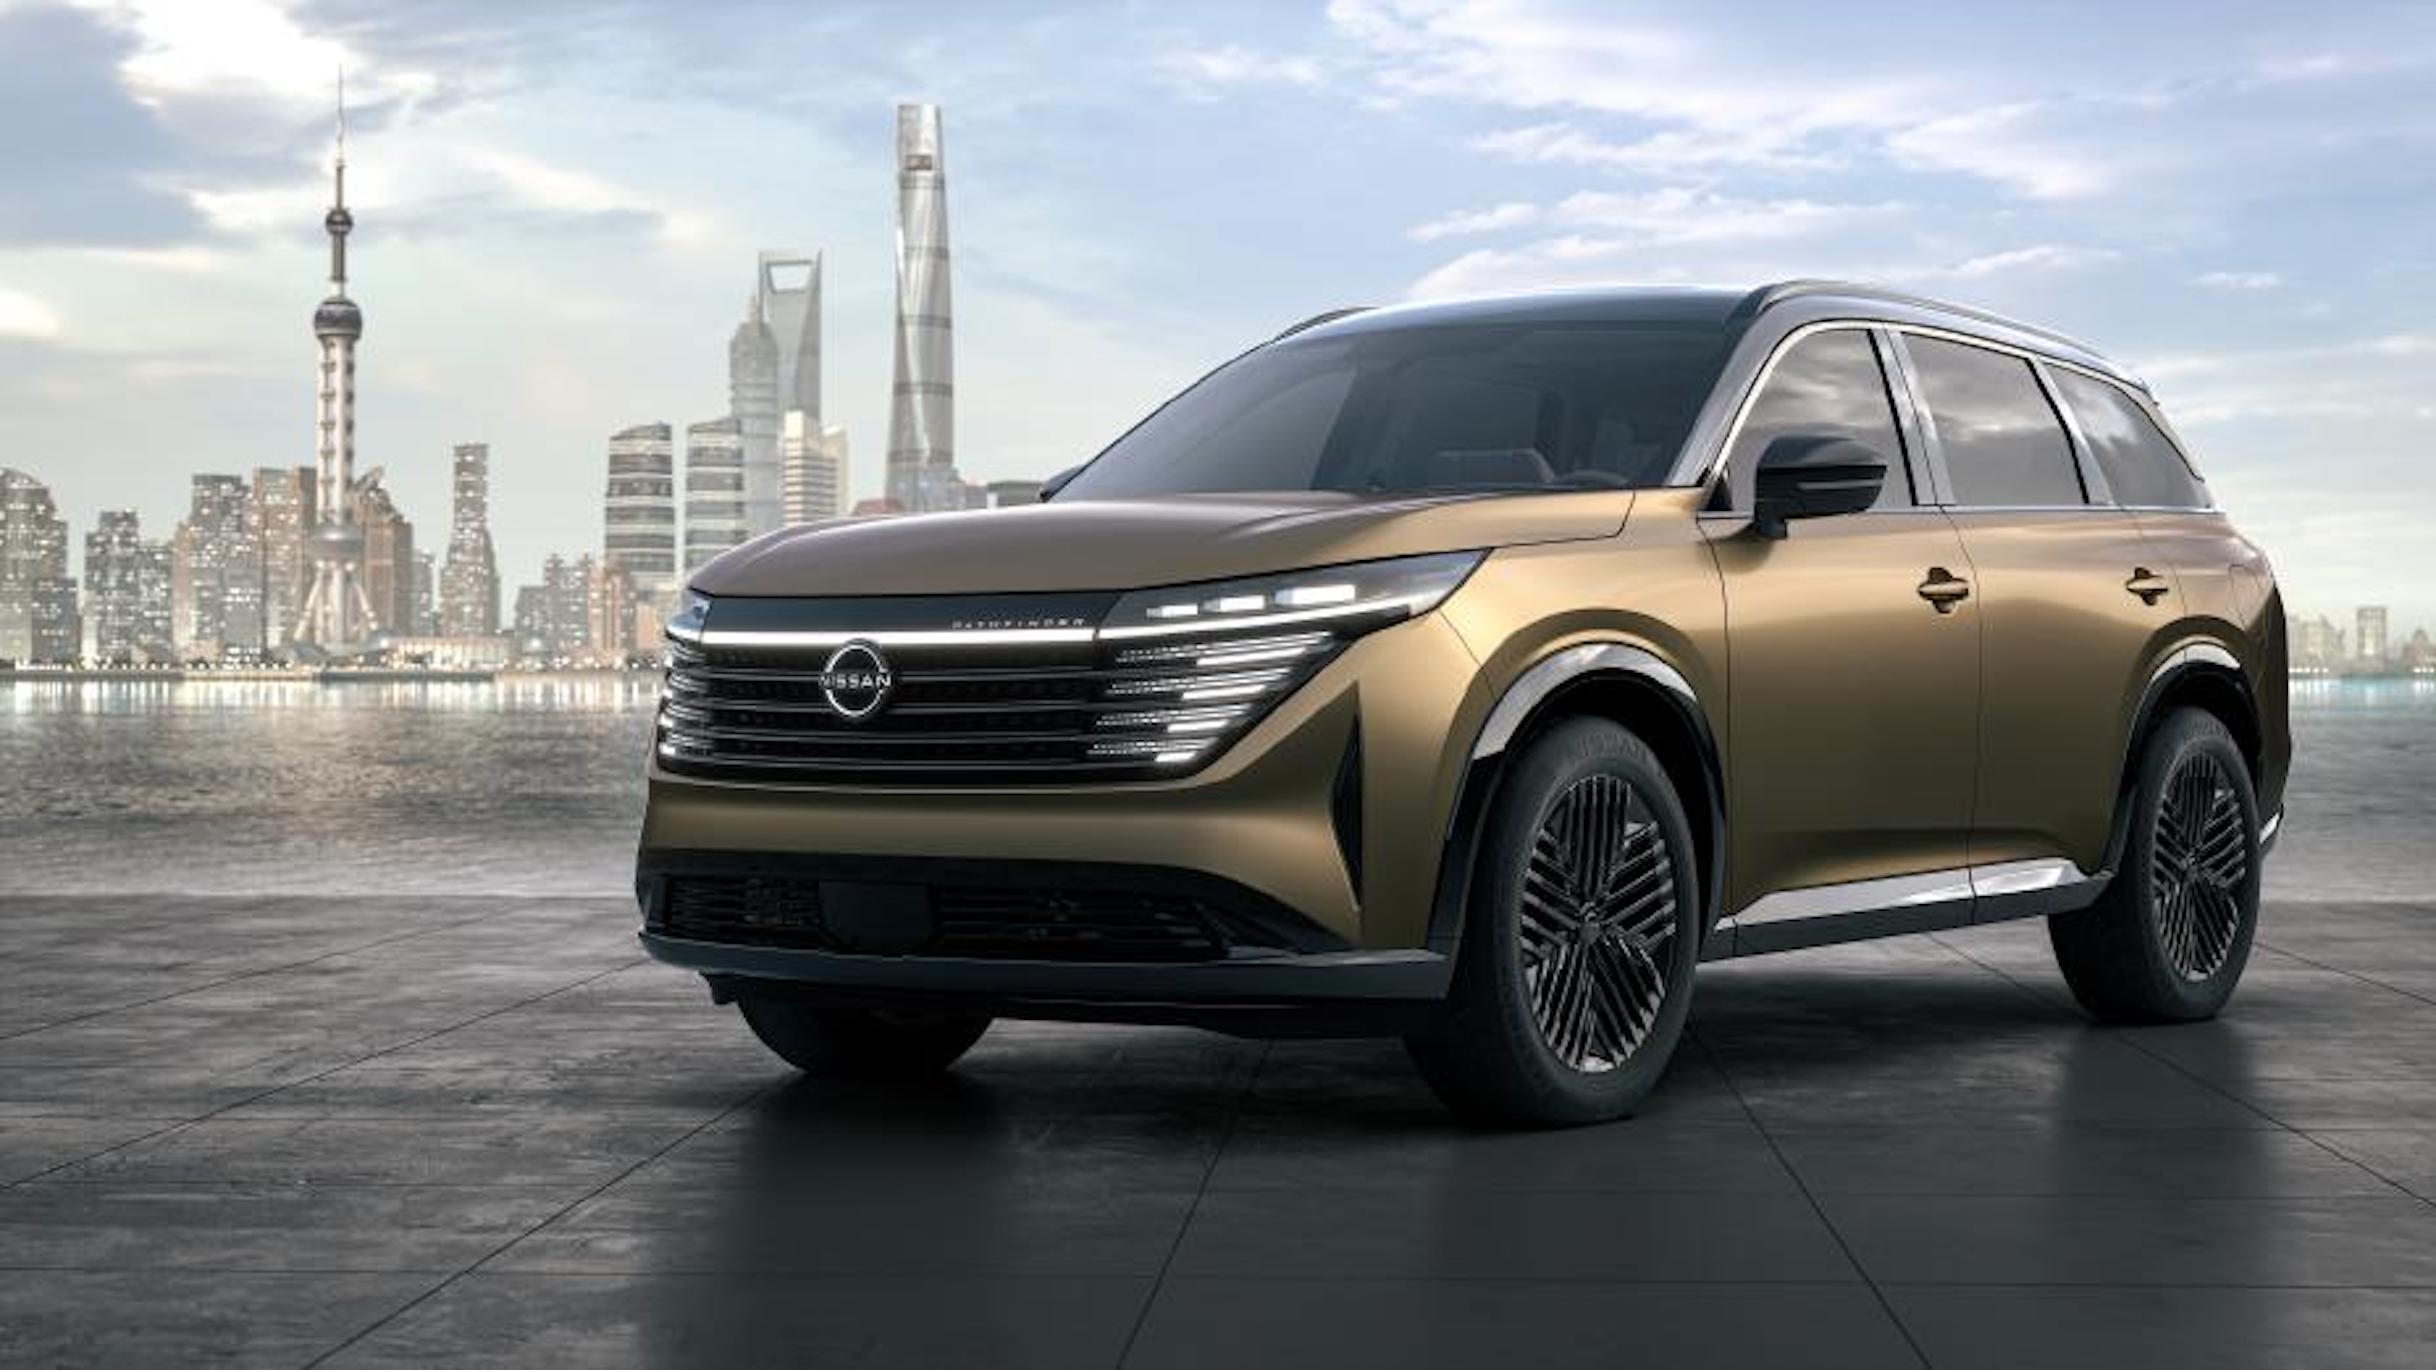 2023 Nissan Patrol Facelift Status: New Model Comes With a V6 Engine -  Future SUVs